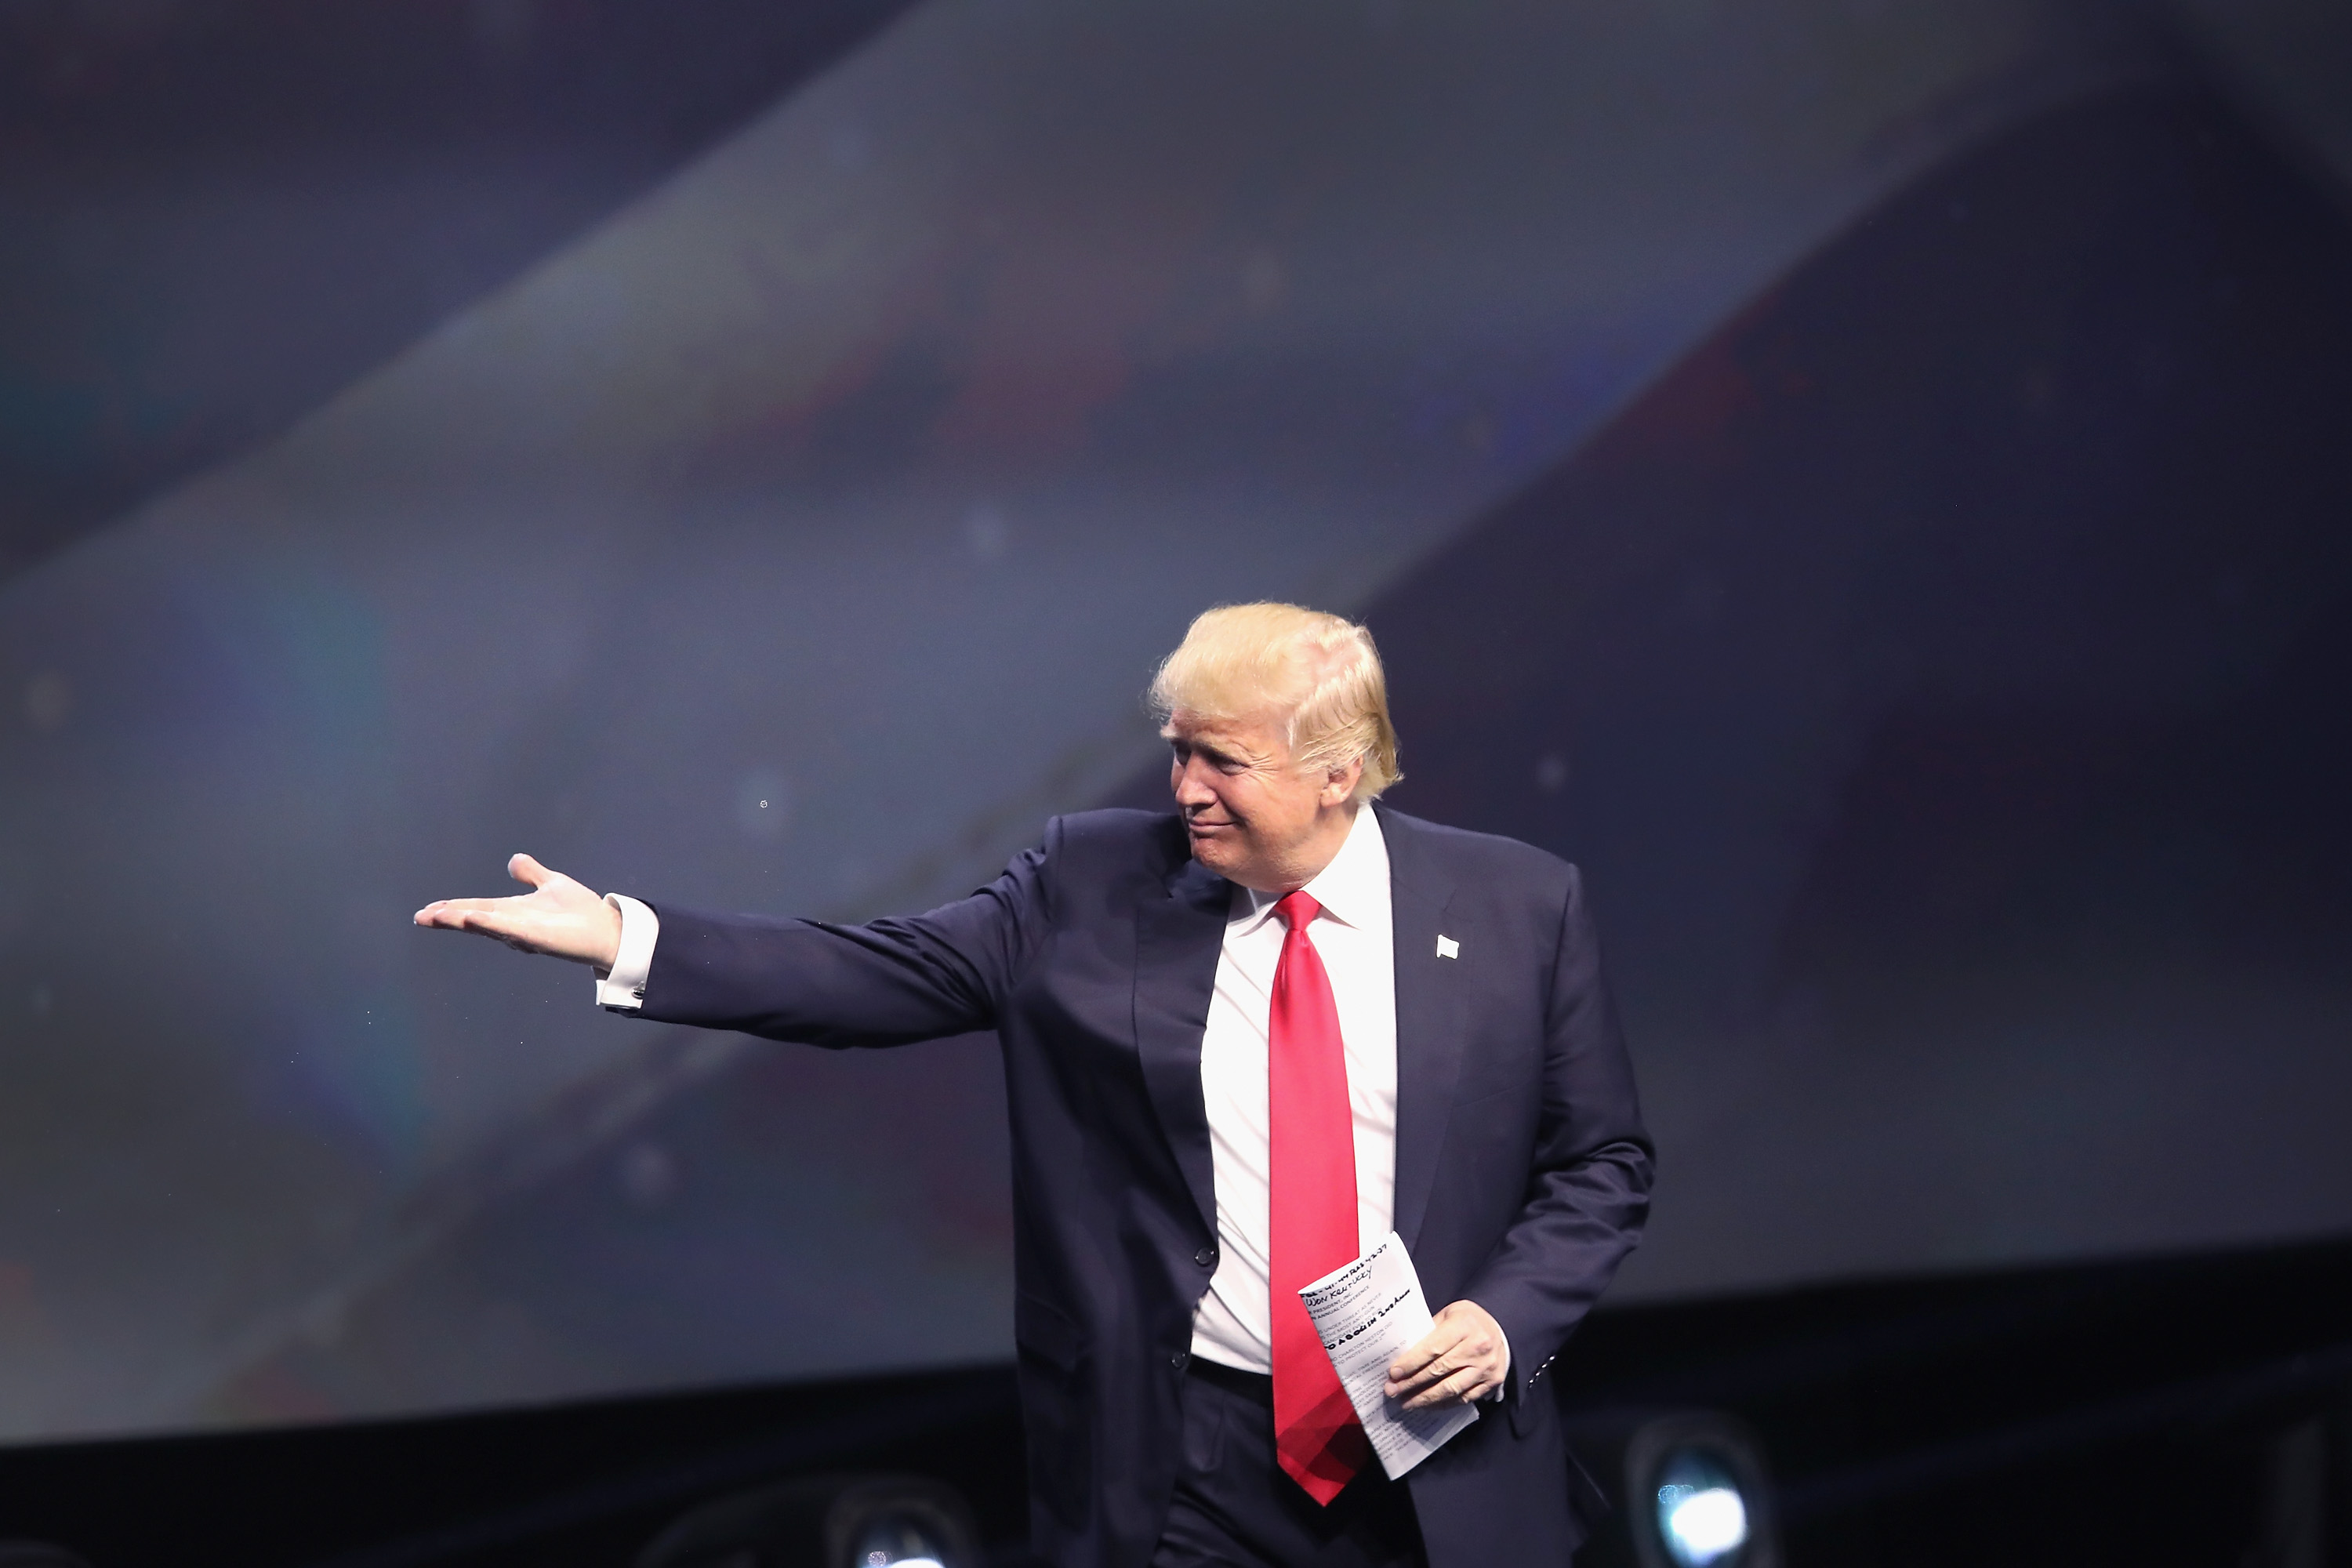 Republican presidential candidate Donald Trump is introduced at the National Rifle Association's NRA-ILA Leadership Forum during the NRA Convention at the Kentucky Exposition Center on May 20, 2016 in Louisville, Kentucky. The NRA endorsed Trump at the convention. The convention runs May 22. 